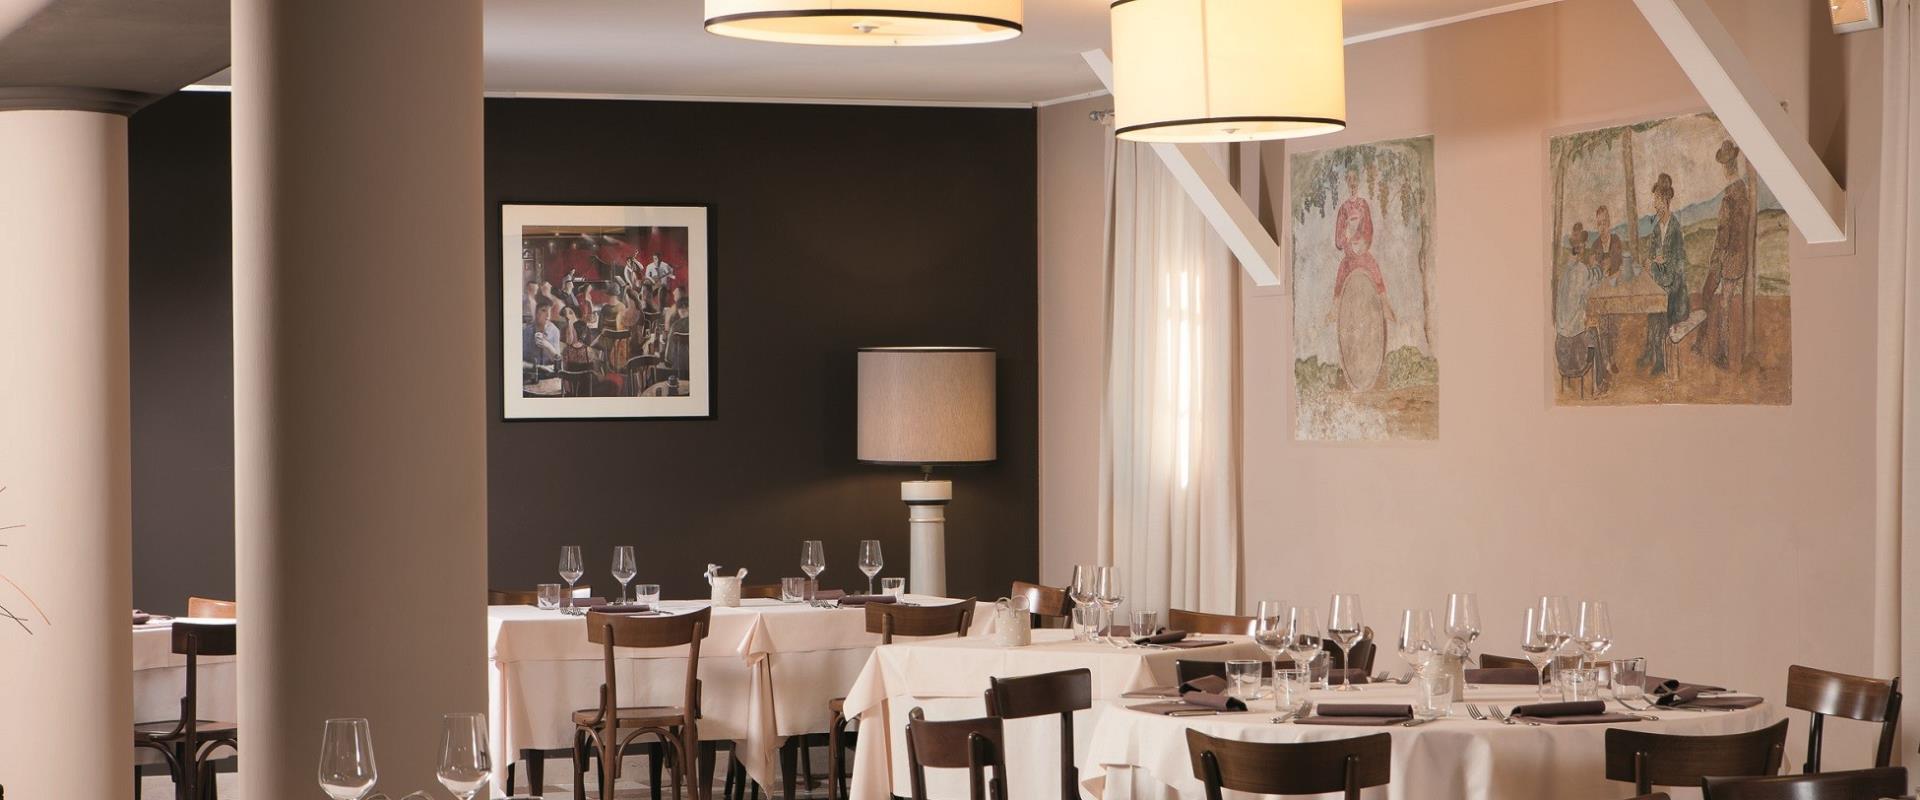 Looking for a hotel with a restaurant in Treviso-SIlea? Choose Titian Inn Hotel Treviso, modern and elegant 4 stars with restaurant and typical cuisine of the Marca Trevigiana and the territory of Treviso with particular attention to vegetarians and celiacs.